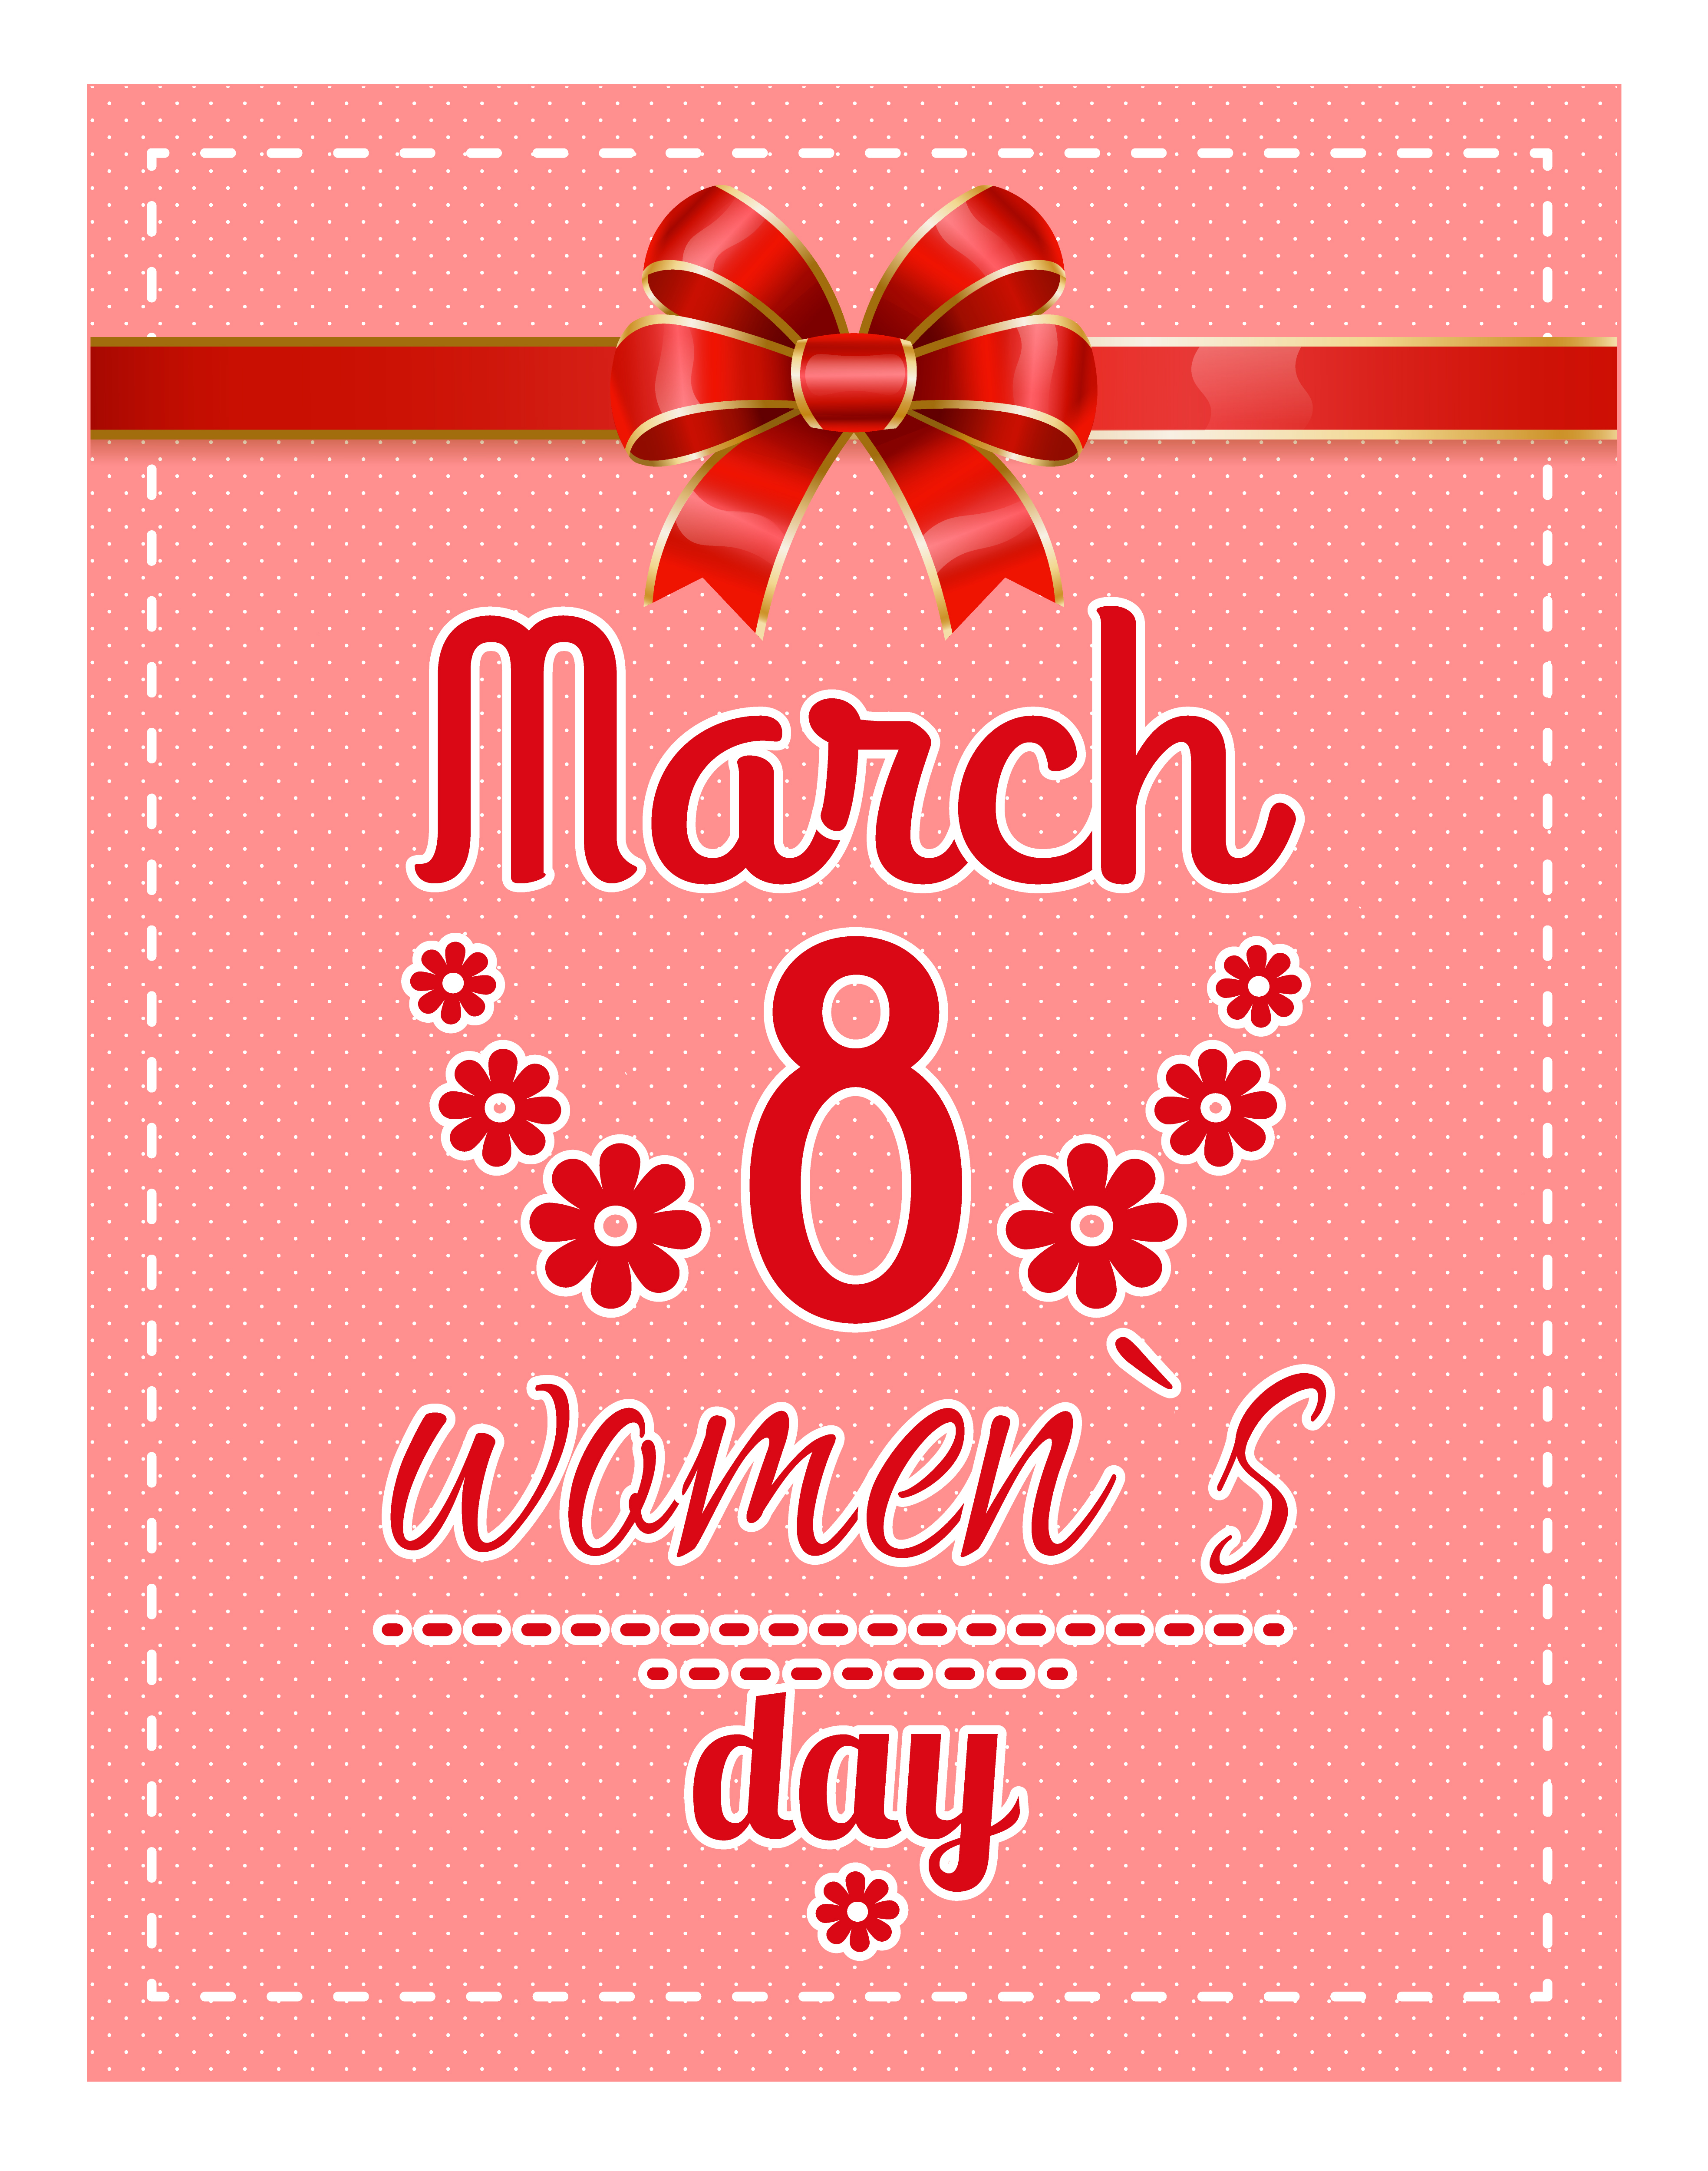 Spring congratulation poster of womens international holiday 8 March. Postcard ladies day decorated by ribbon and bow symbol in red color. Greeting happy festive for female with best wishes vector. Greeting Postcard 8 March, Womens Day Card Vector